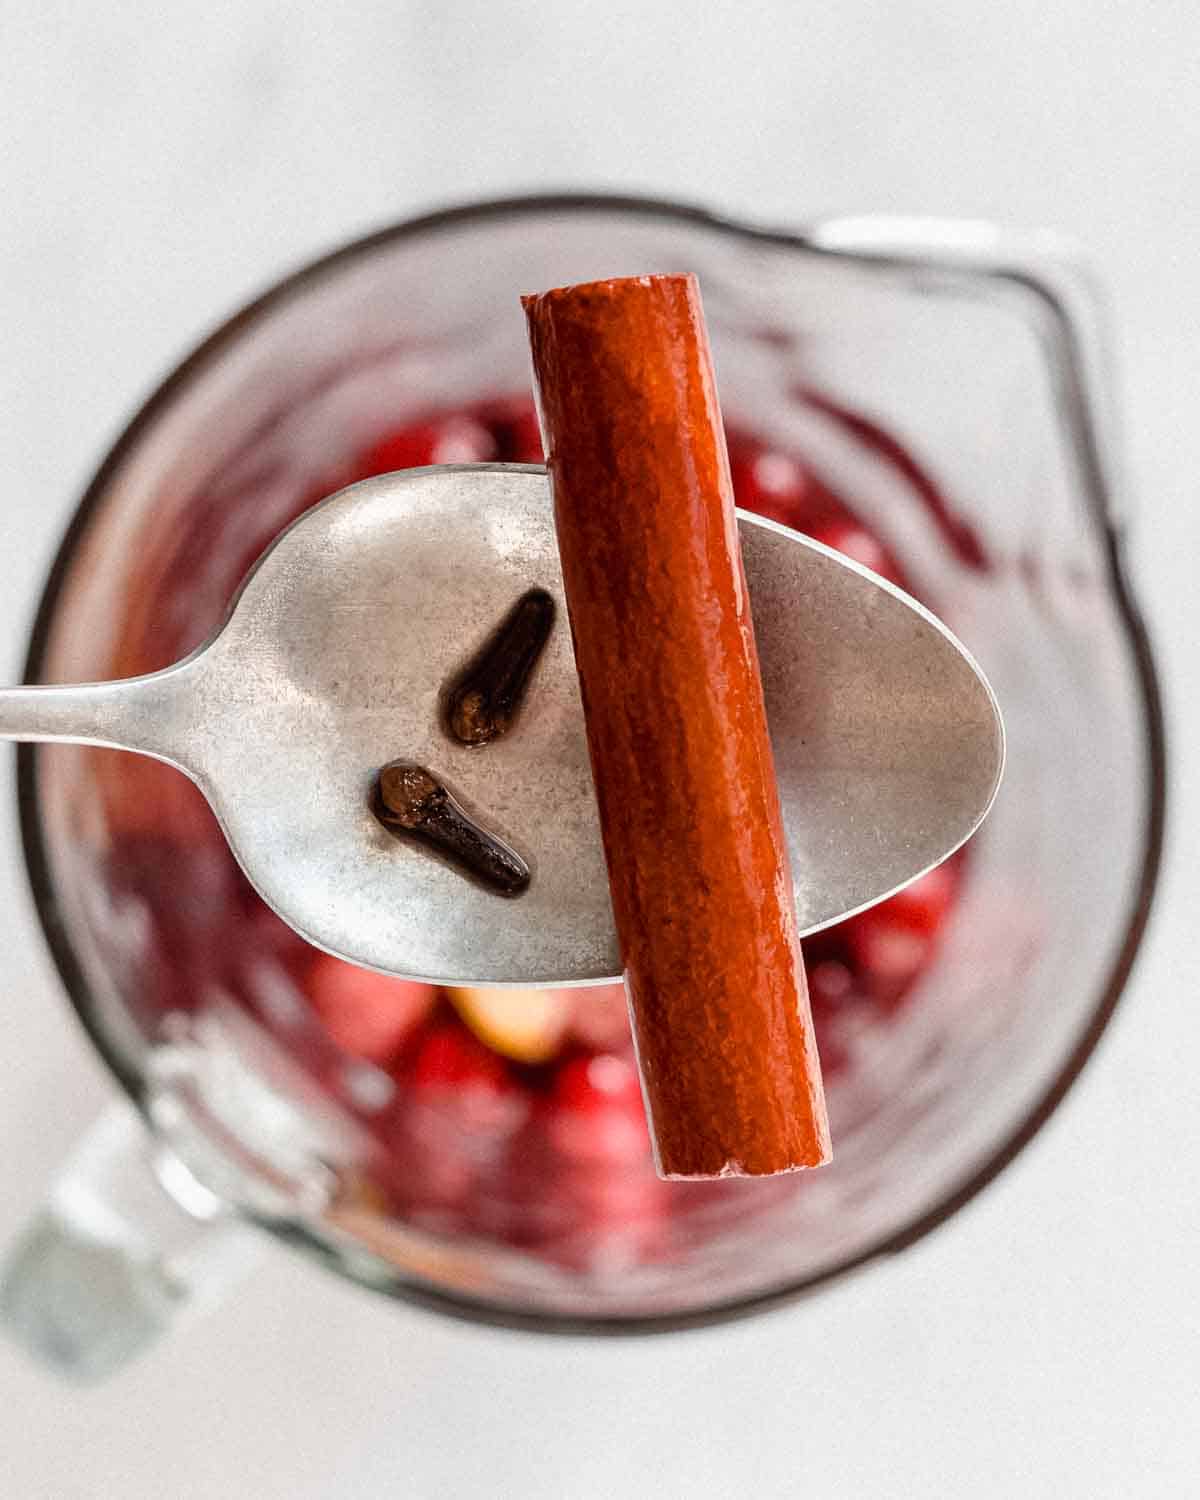 cinnamon stick and 2 cloves removed from the holiday punch.